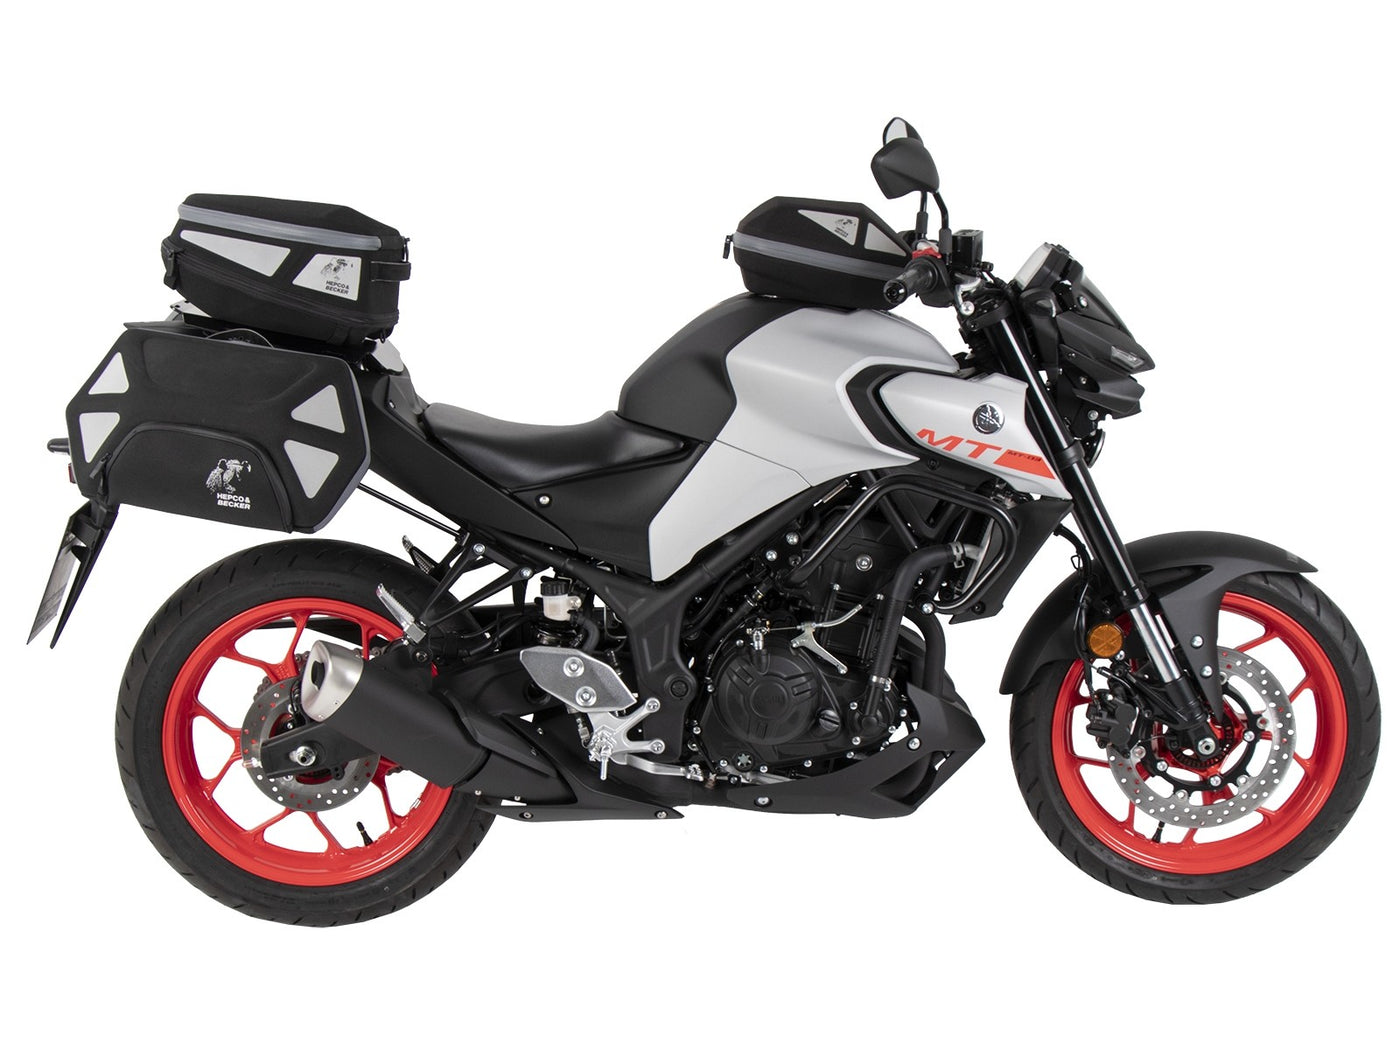 C-Bow SideCarrier for YAMAHA MT-03 (2020-)